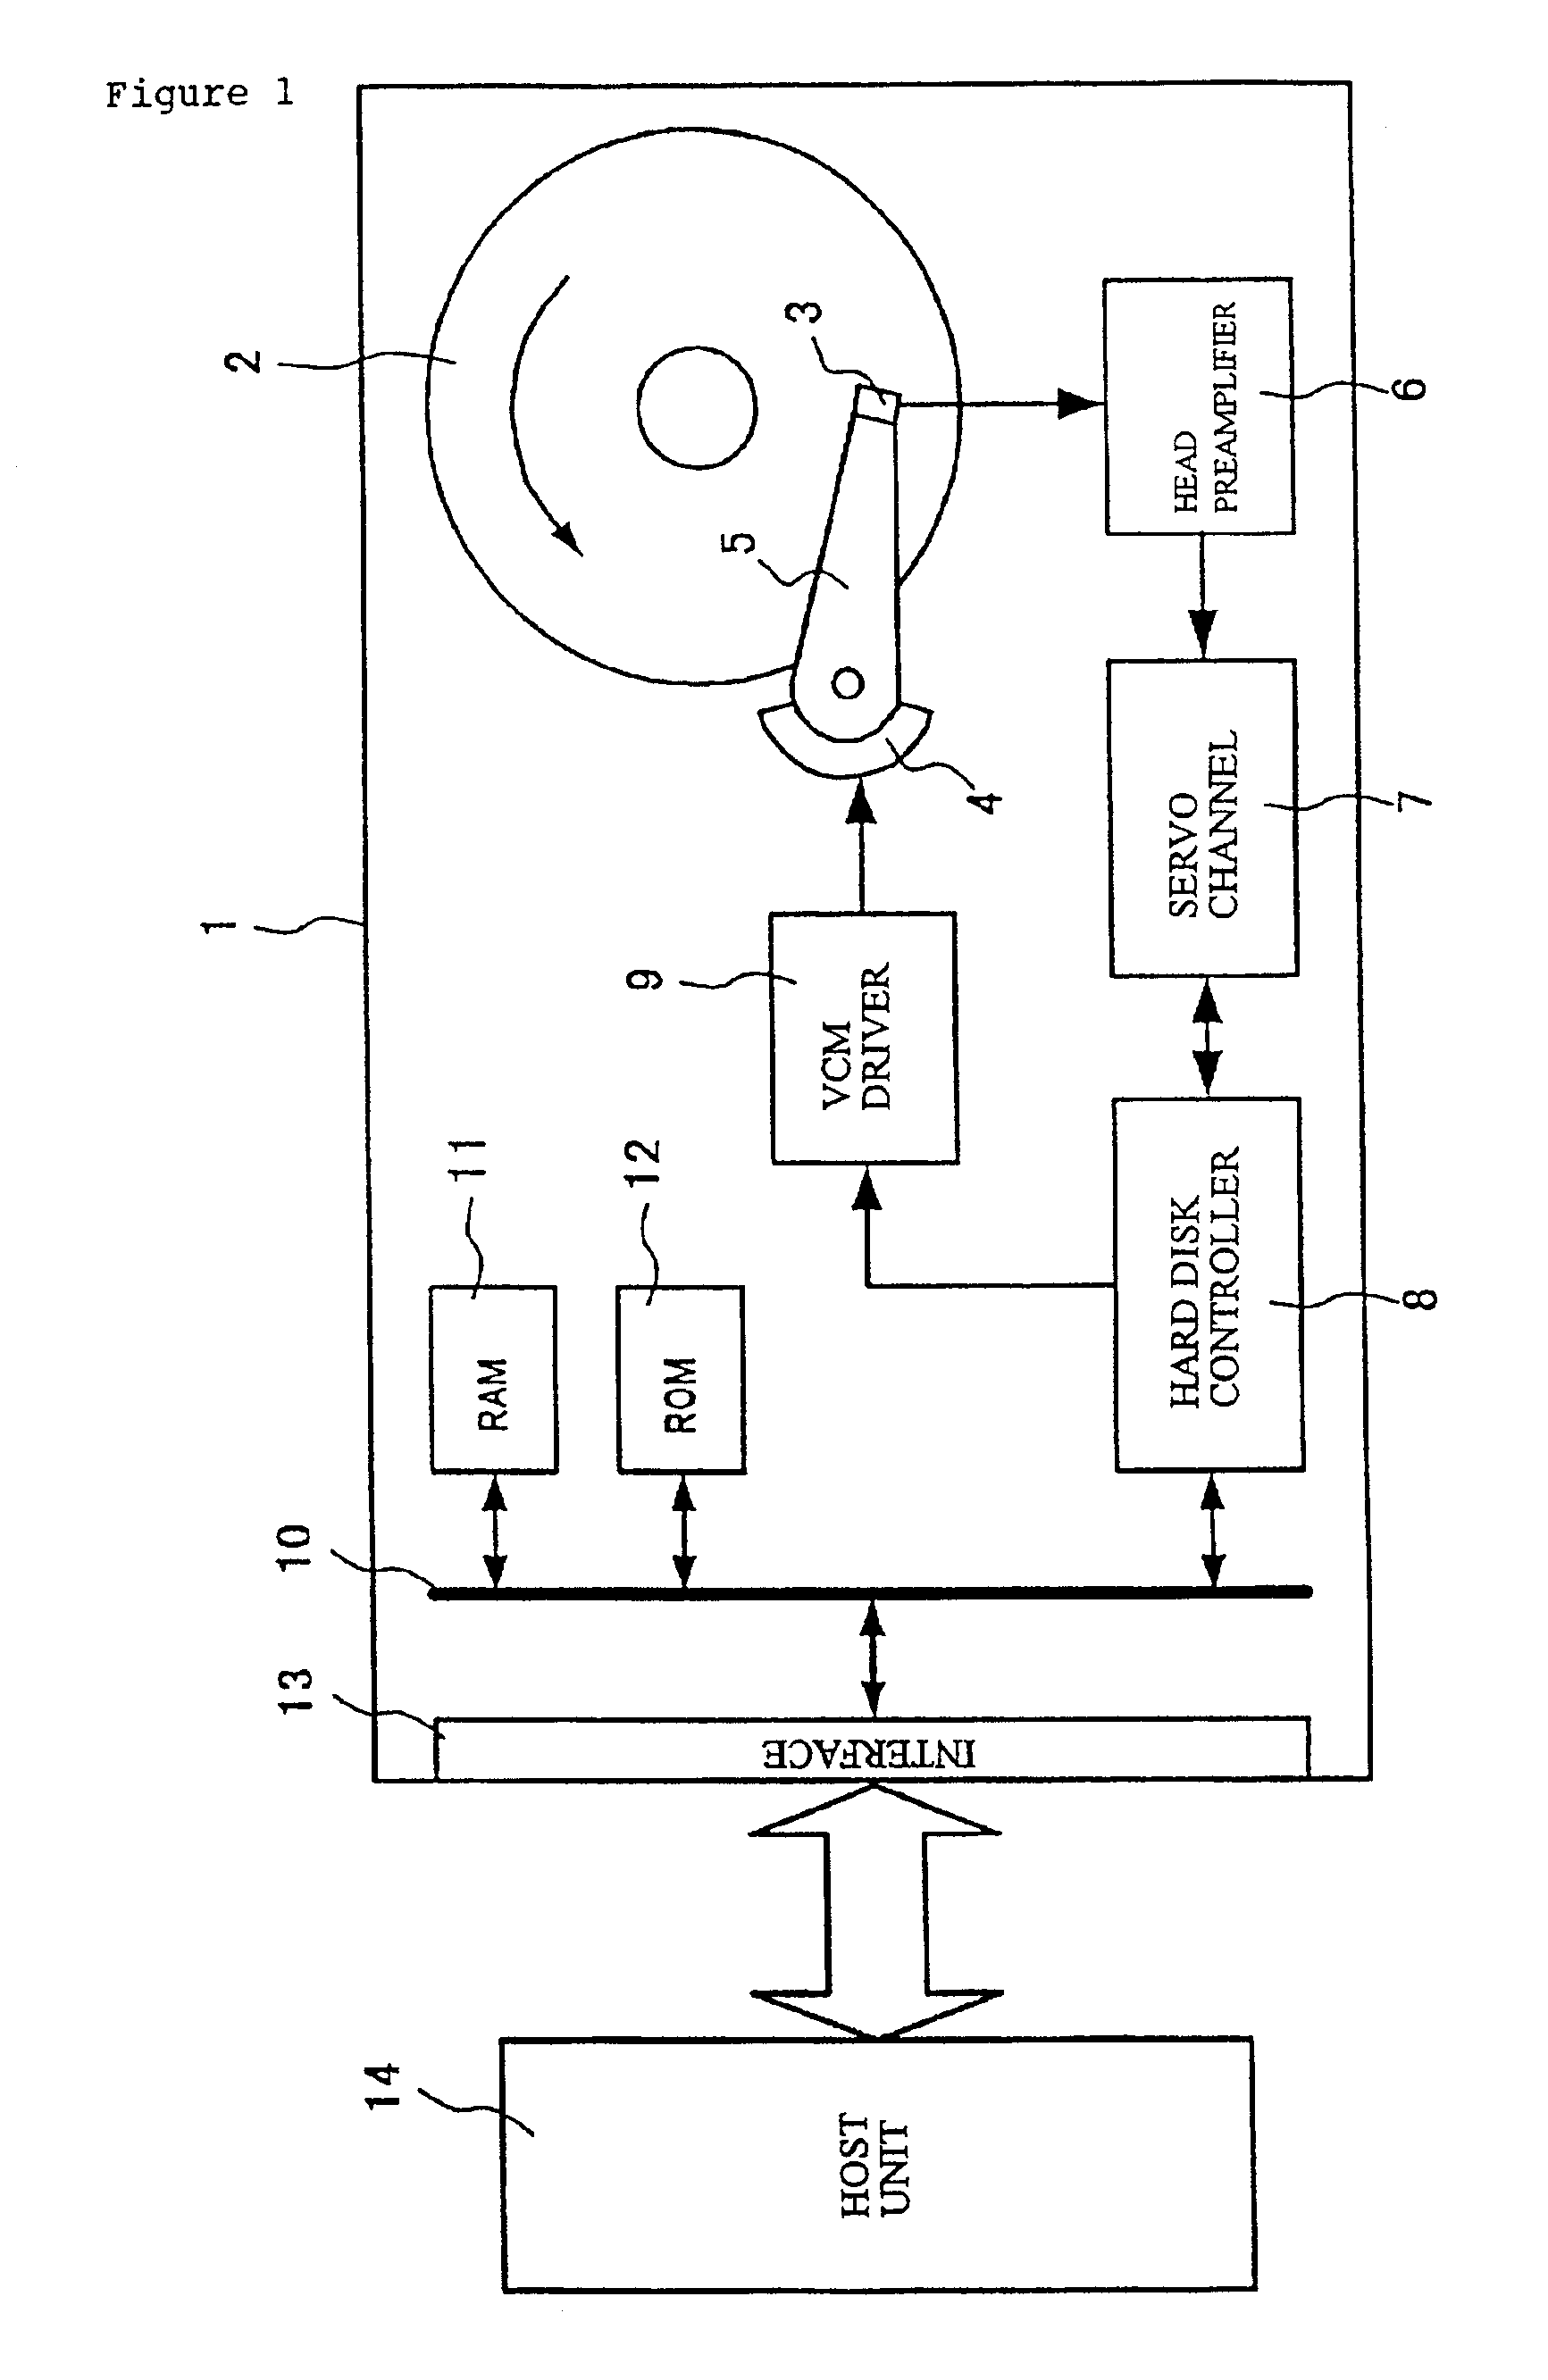 Rotation recording apparatus and method of inspection thereof